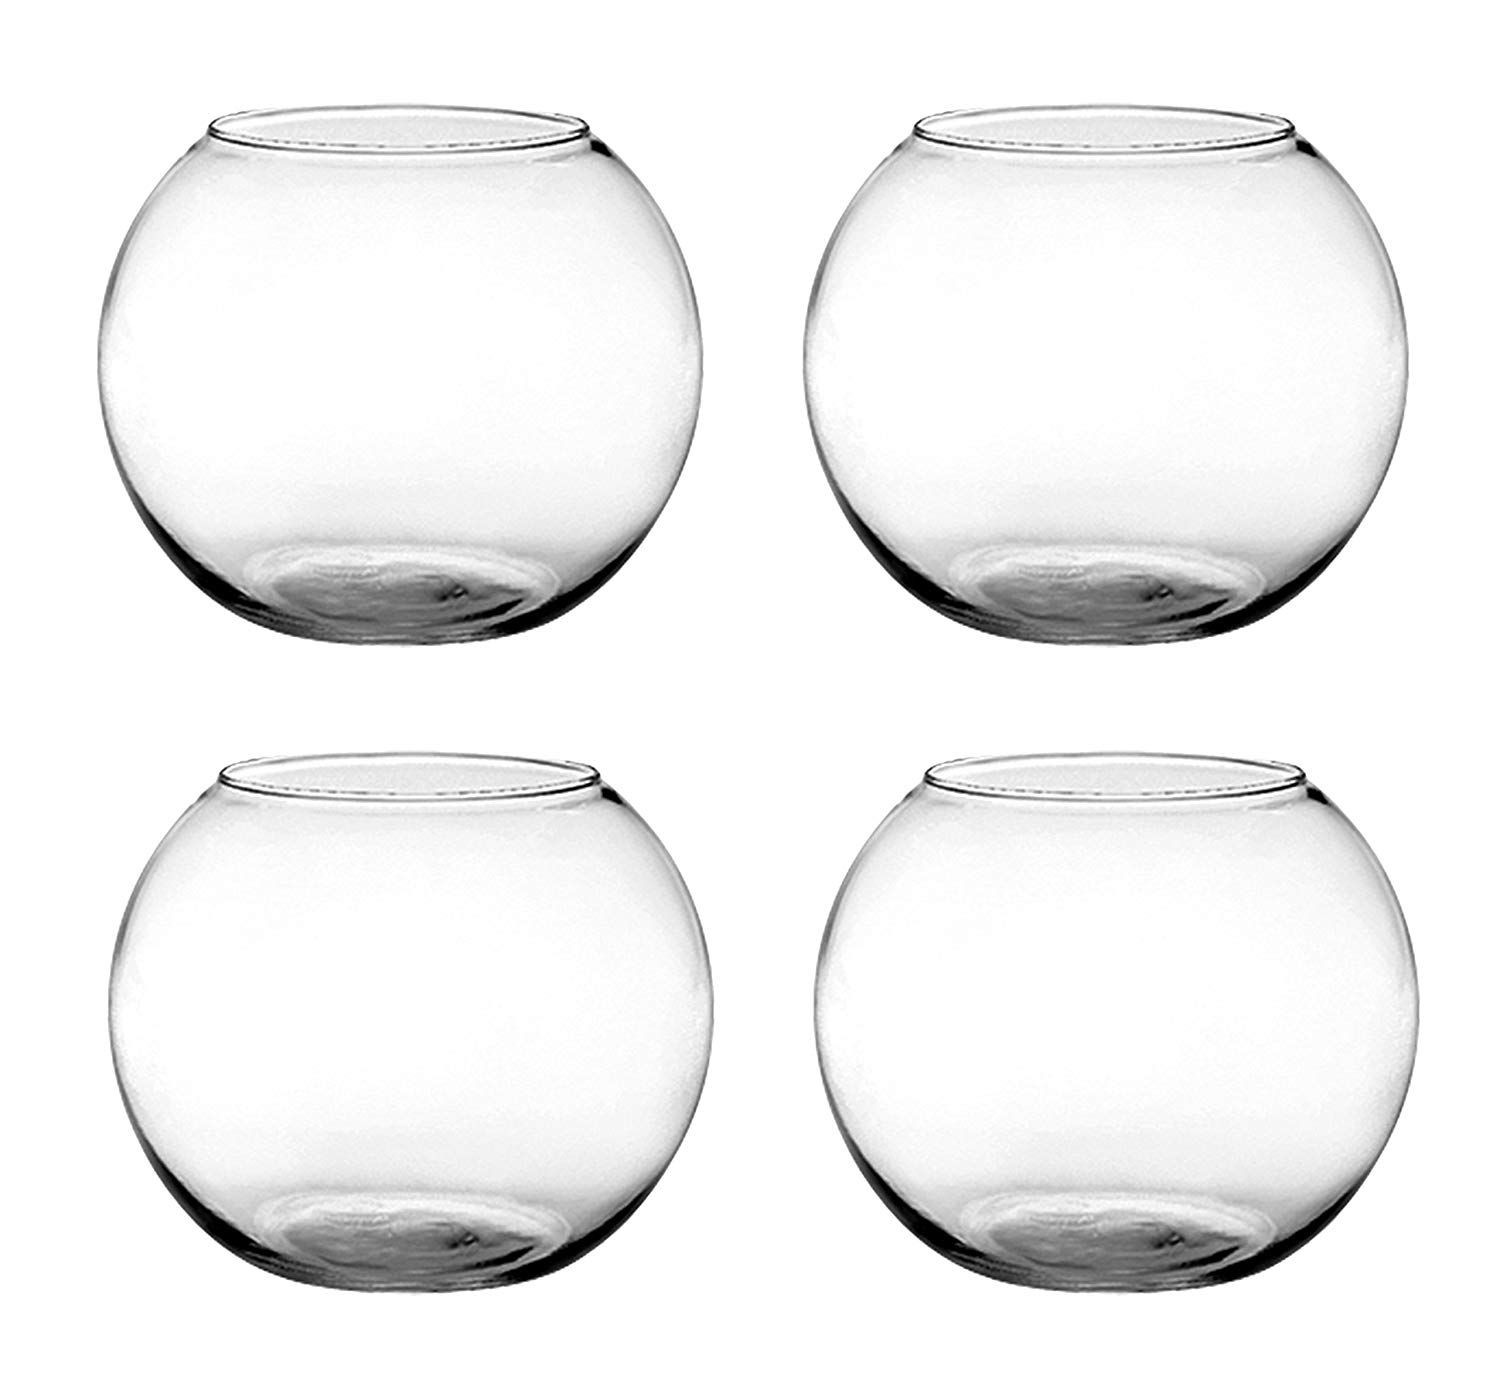 17 attractive Big Clear Glass Vase 2024 free download big clear glass vase of 32 wide mouth vase the weekly world with regard to amazon syndicate sales 6 rose bowl clear planters garden